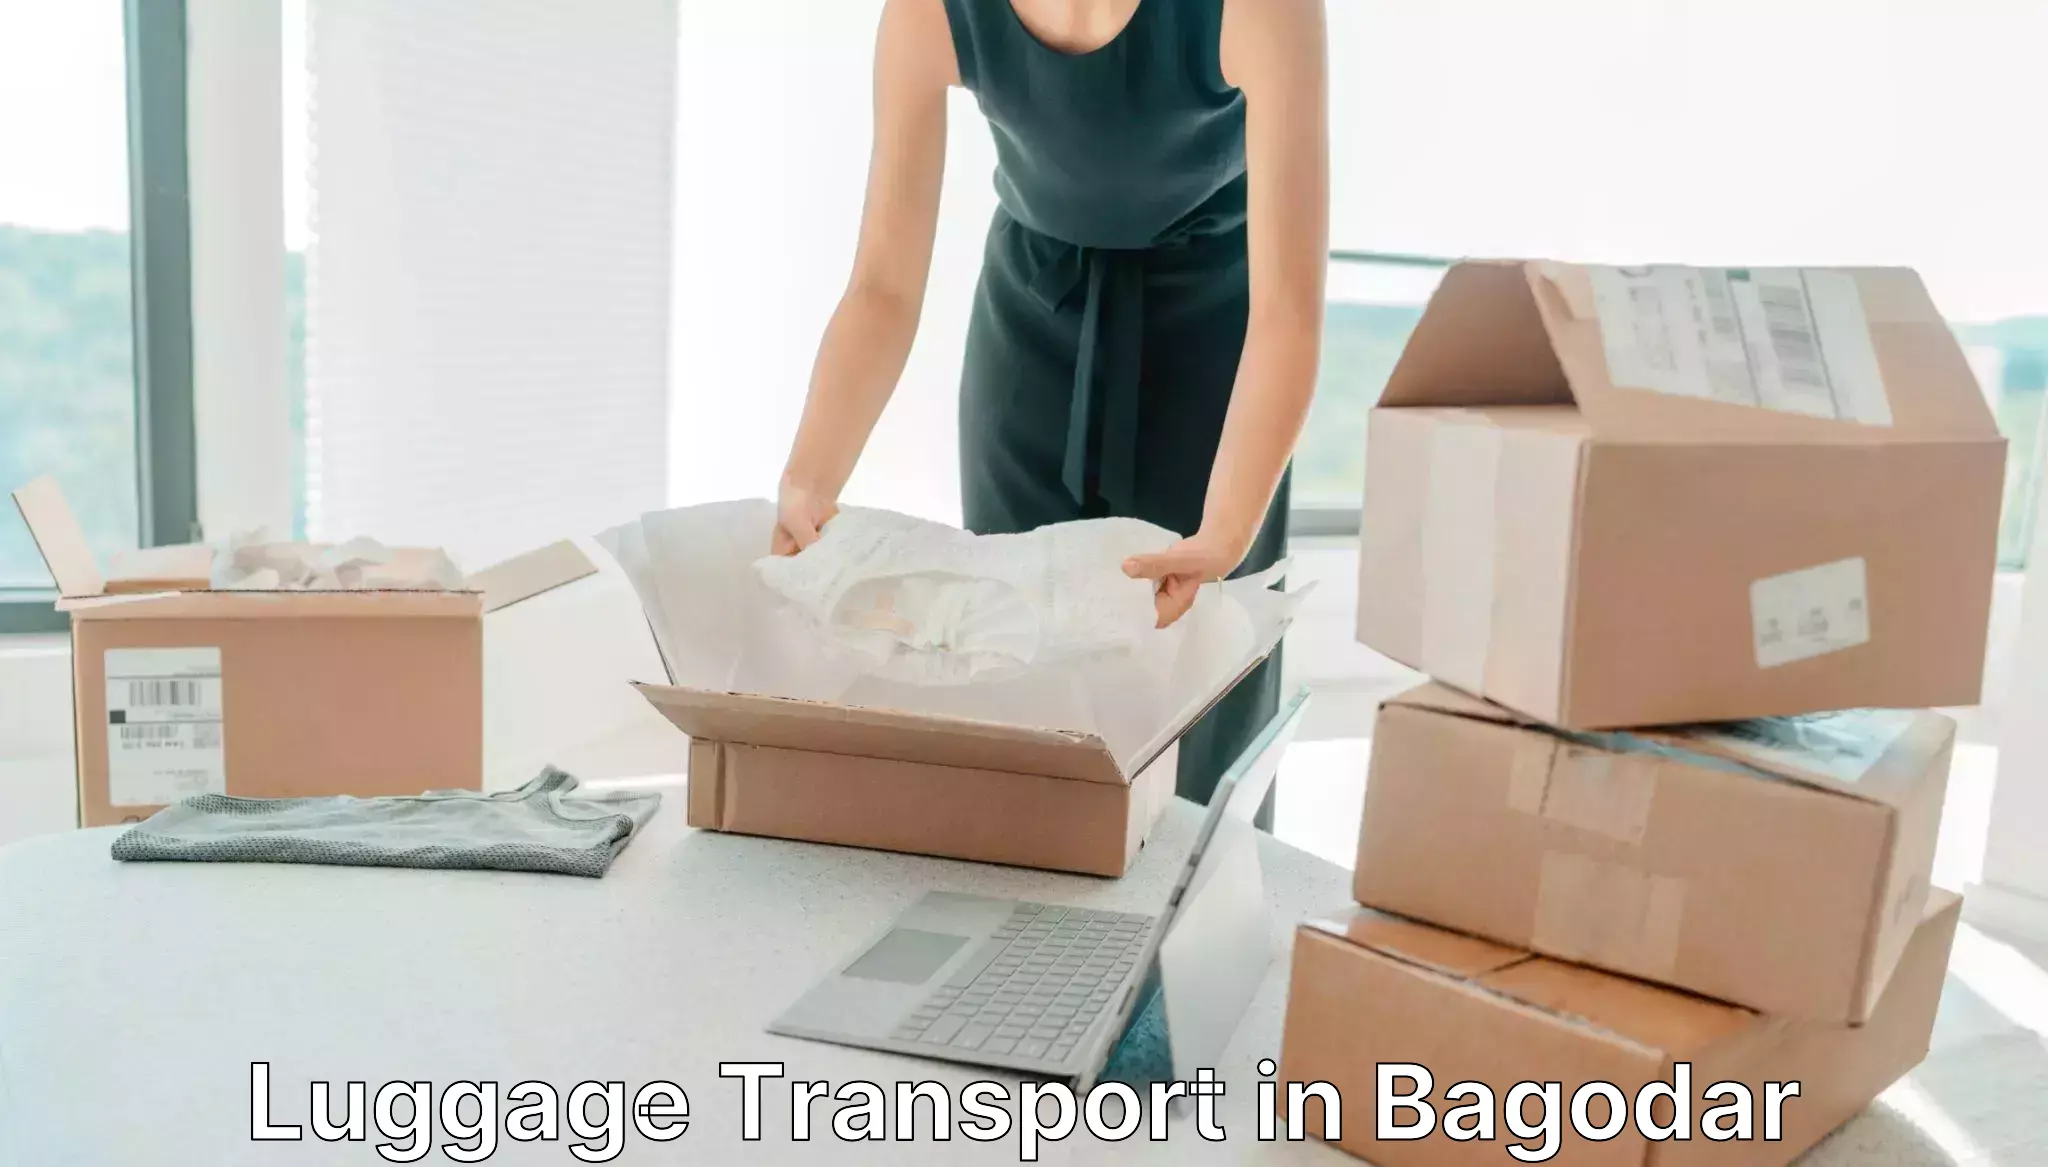 Luggage delivery operations in Bagodar